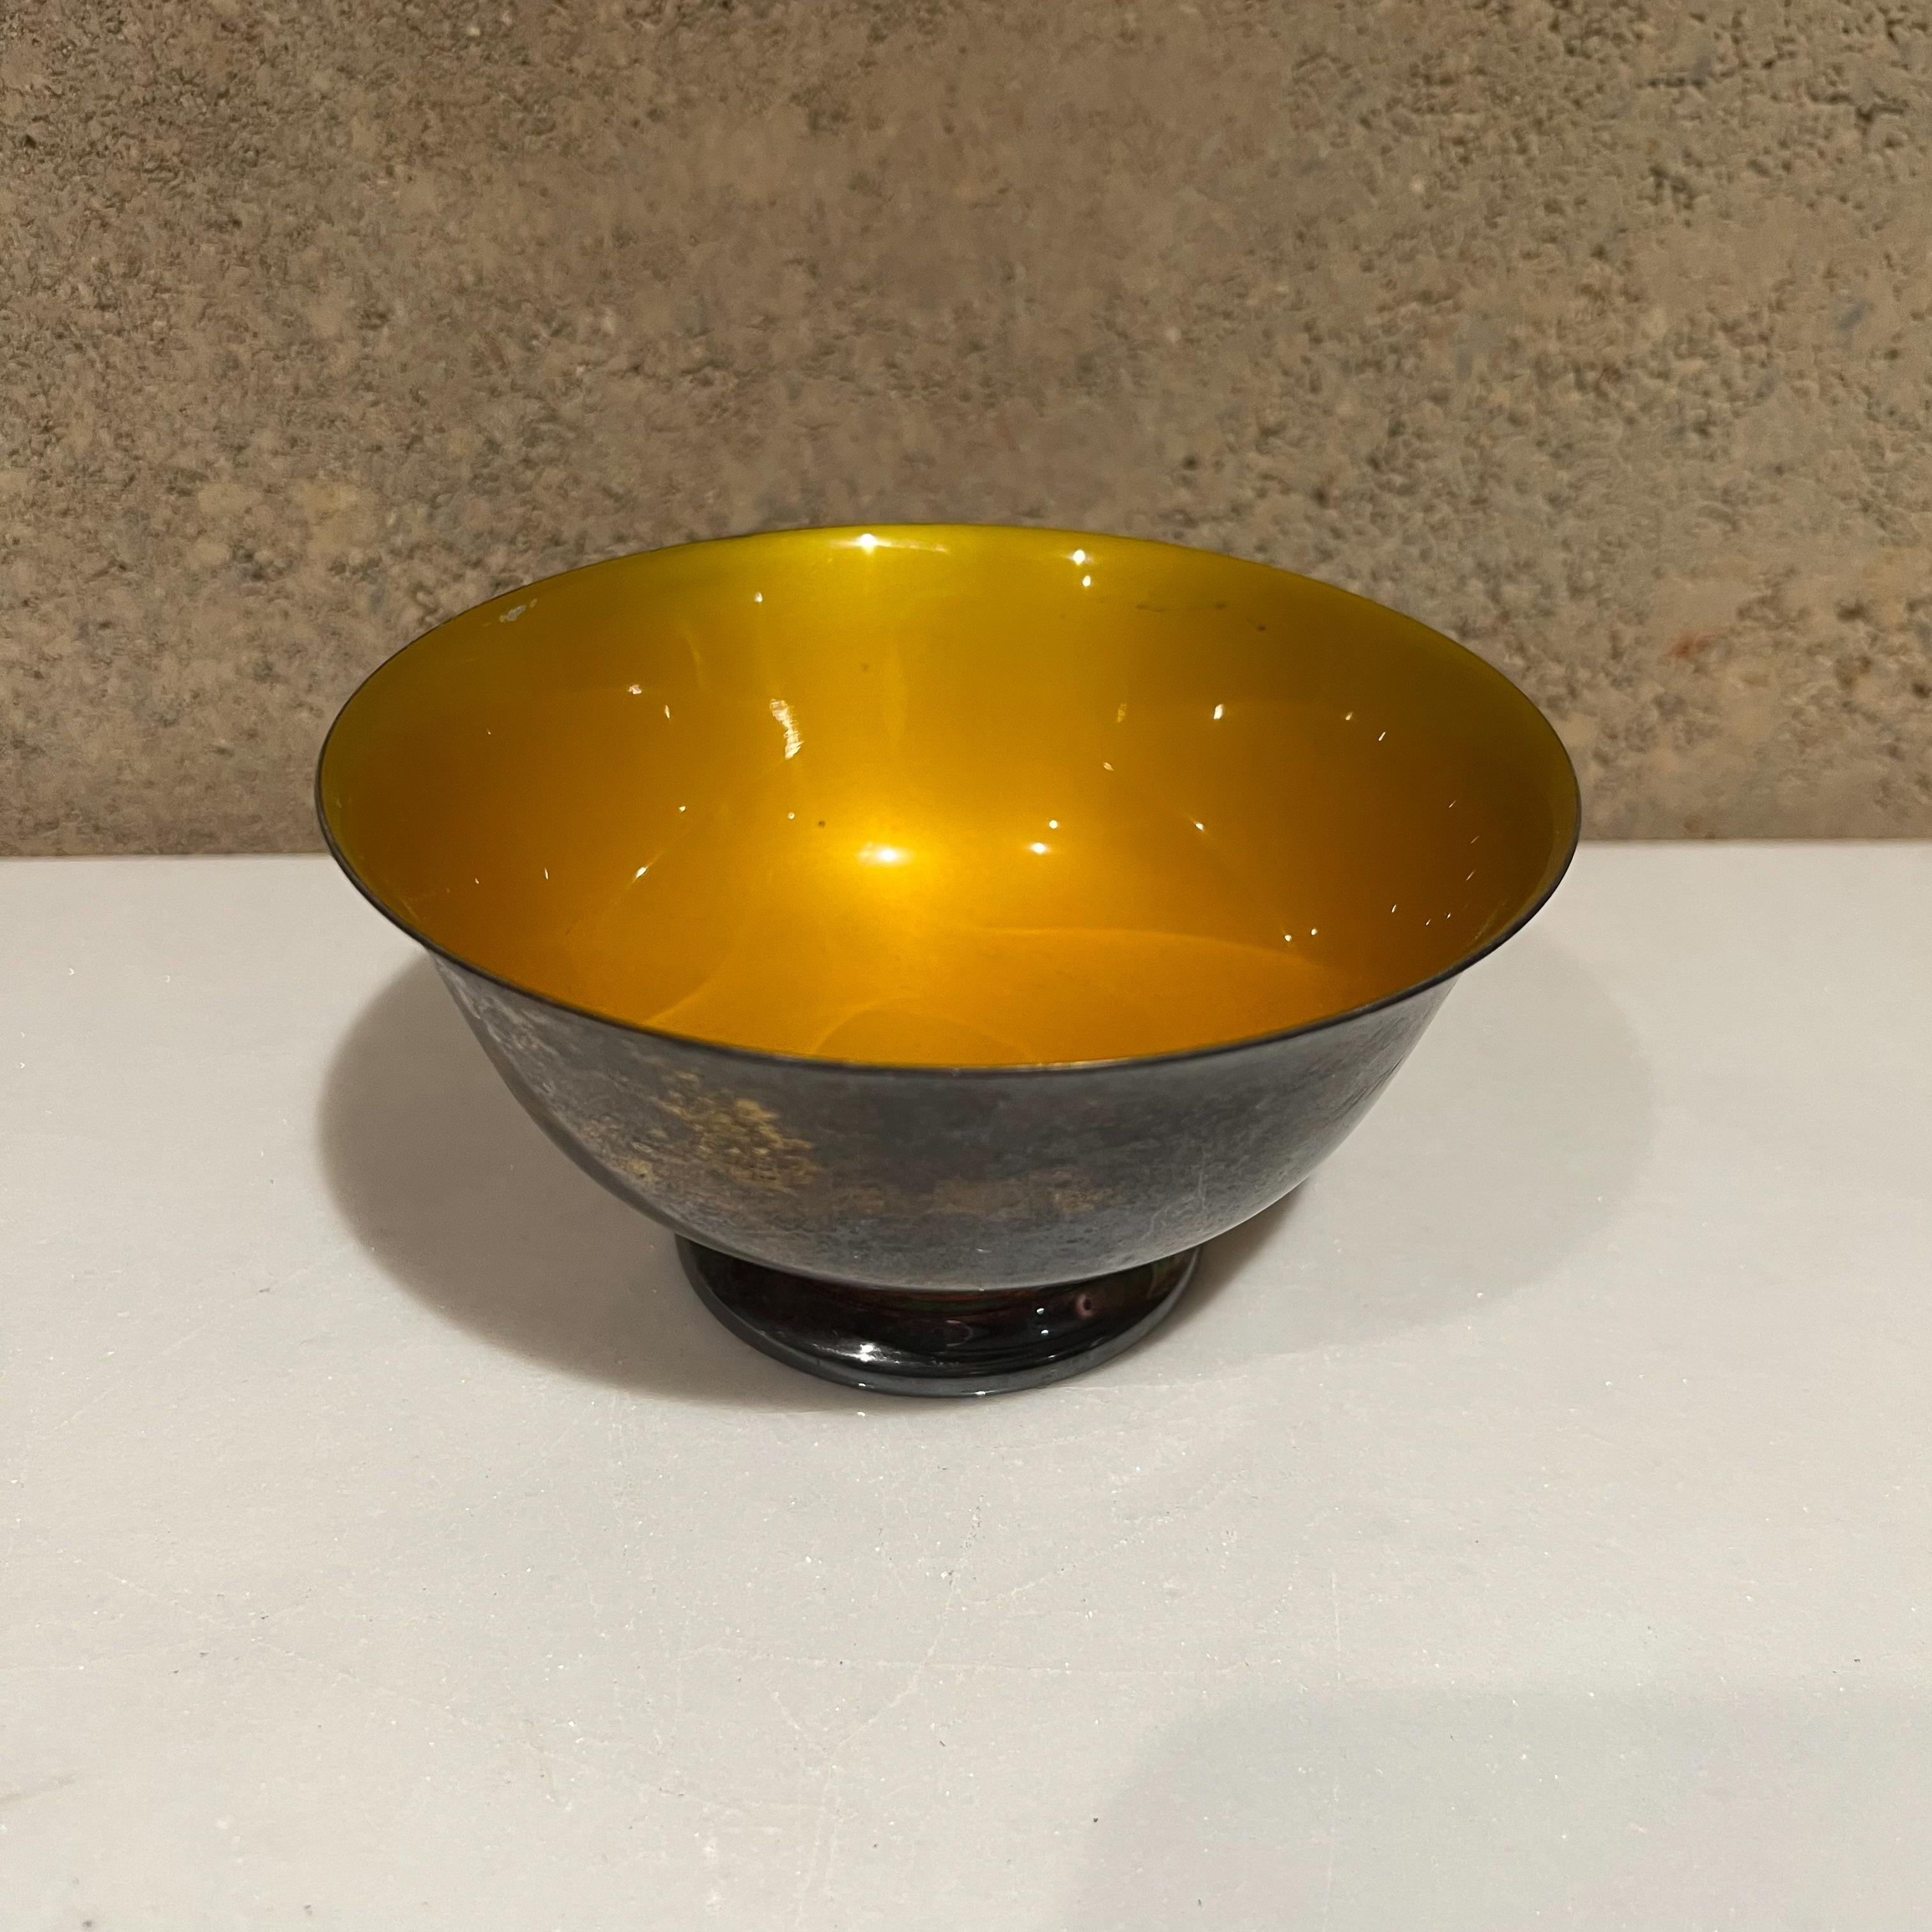 Vintage Yellow Enameled Bowl John Prip
1960s Reed & Barton Modern Golden Yellow Silverplated Enamel Dish 
Footed Bowl 
Maker stamped 102
2.75 x 5.38
Preowned unrestored original vintage, expect vintage tarnish.
See images provided.
